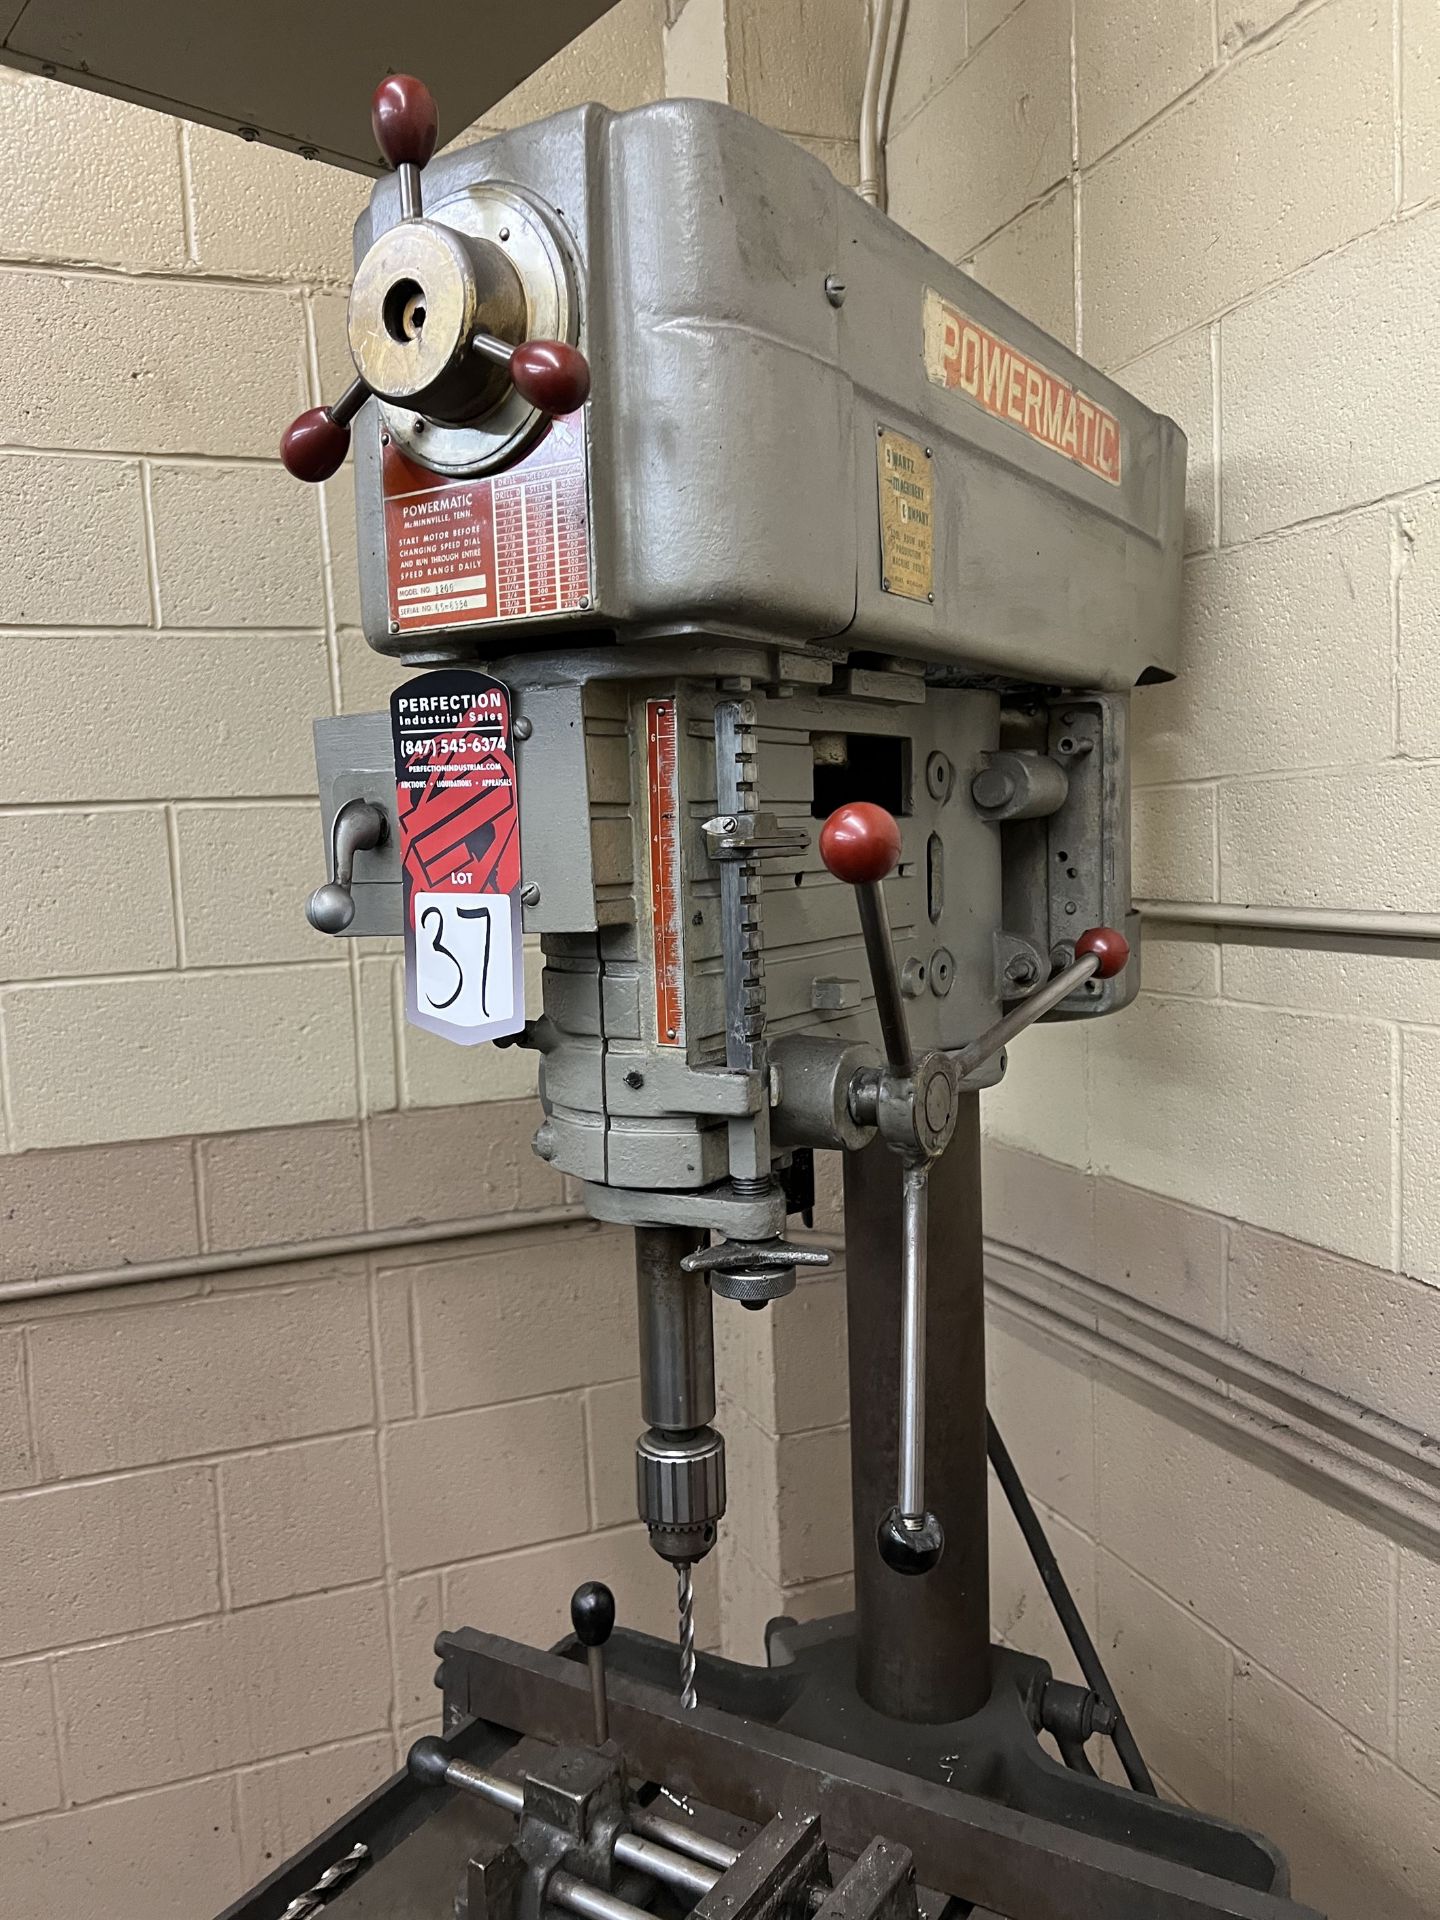 POWERMATIC 1200 Drill Press, s/n 65-6334, 18" x 15-1/2" Table, 300-2000 RPM (This lot is located - Image 3 of 6